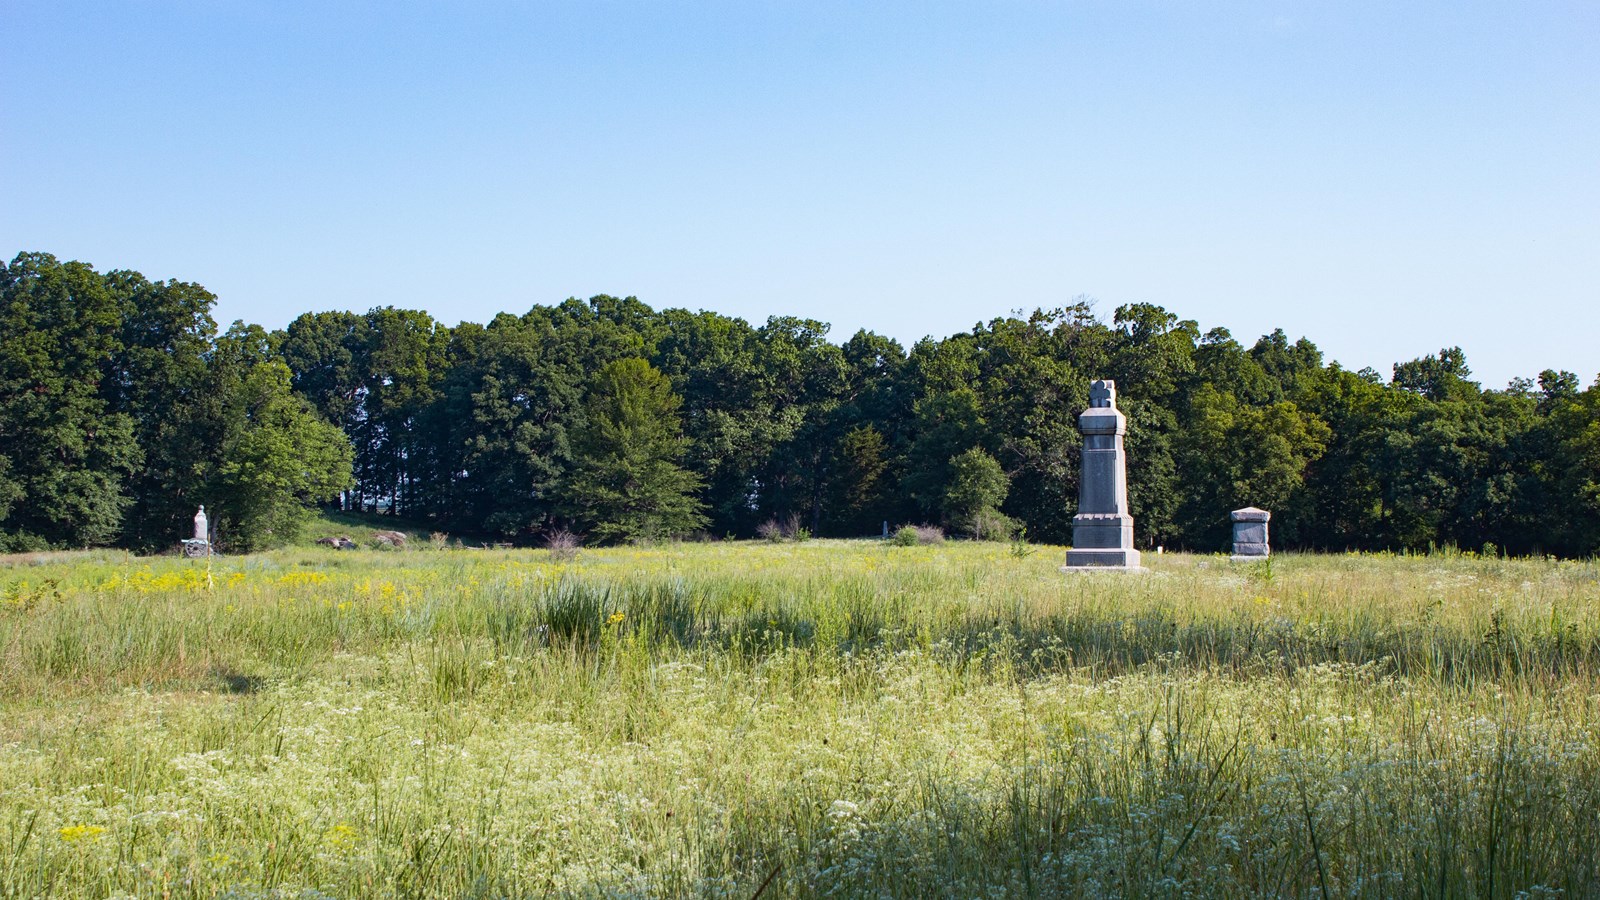 A green farm field with monuments scattered throughout. The field is surrounded by trees. 